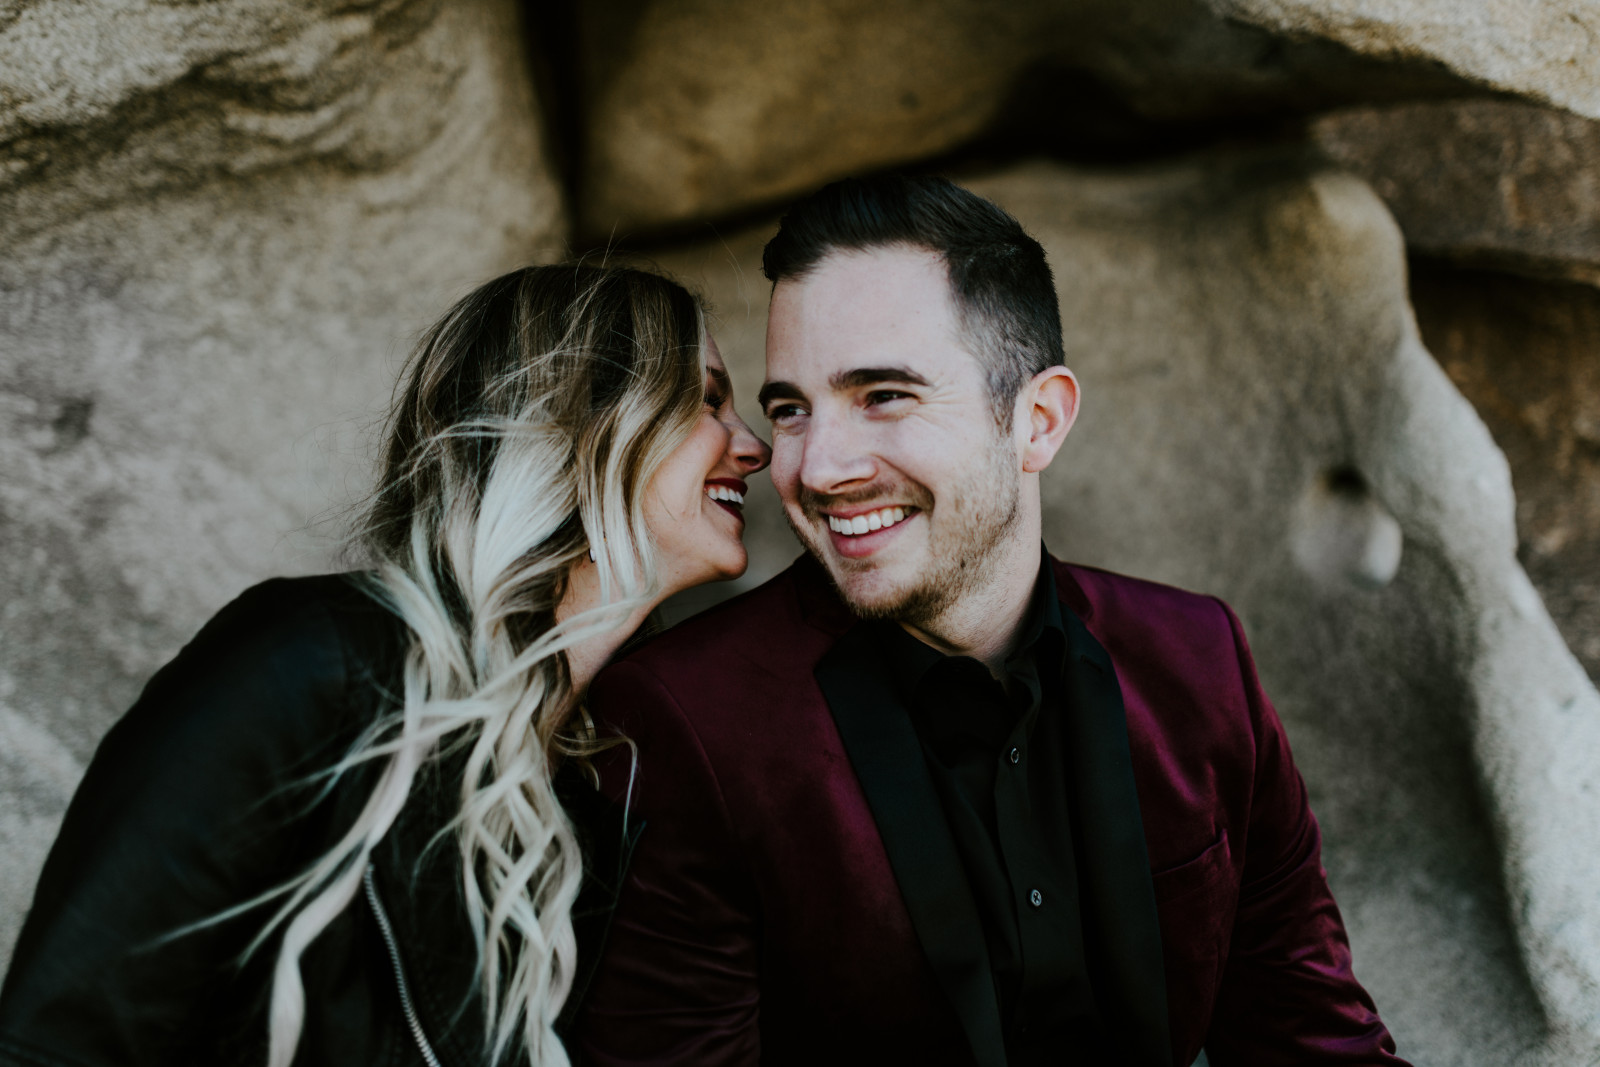 Alyssa goes in to kiss Jeremy. Elopement wedding photography at Joshua Tree National Park by Sienna Plus Josh.